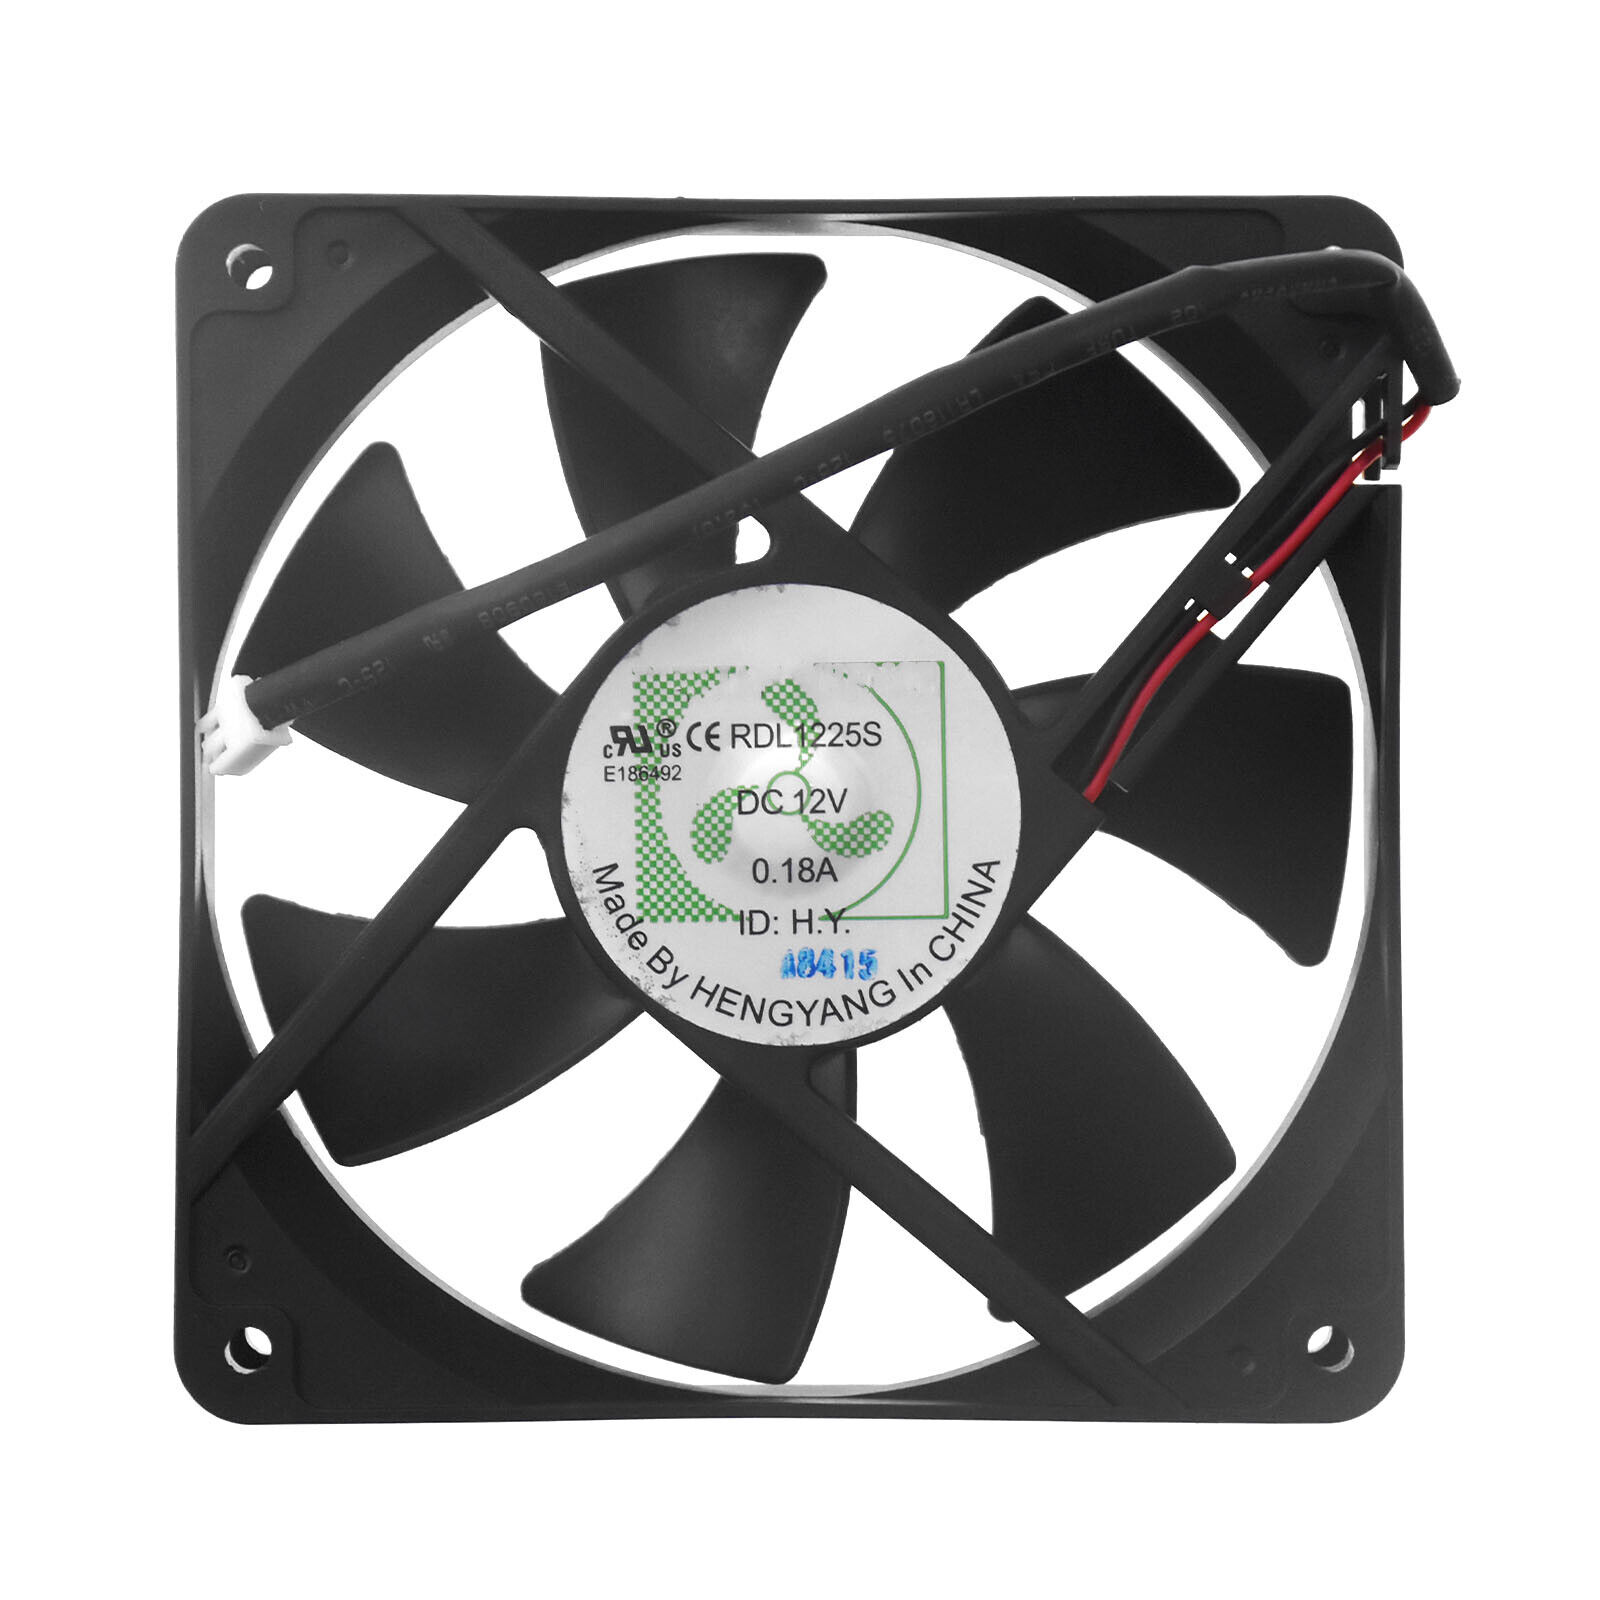 For RUILIAN SCIENCE RDL1225S 12025 12V 0.18A Cooling fan 2pin 120*120*25mm